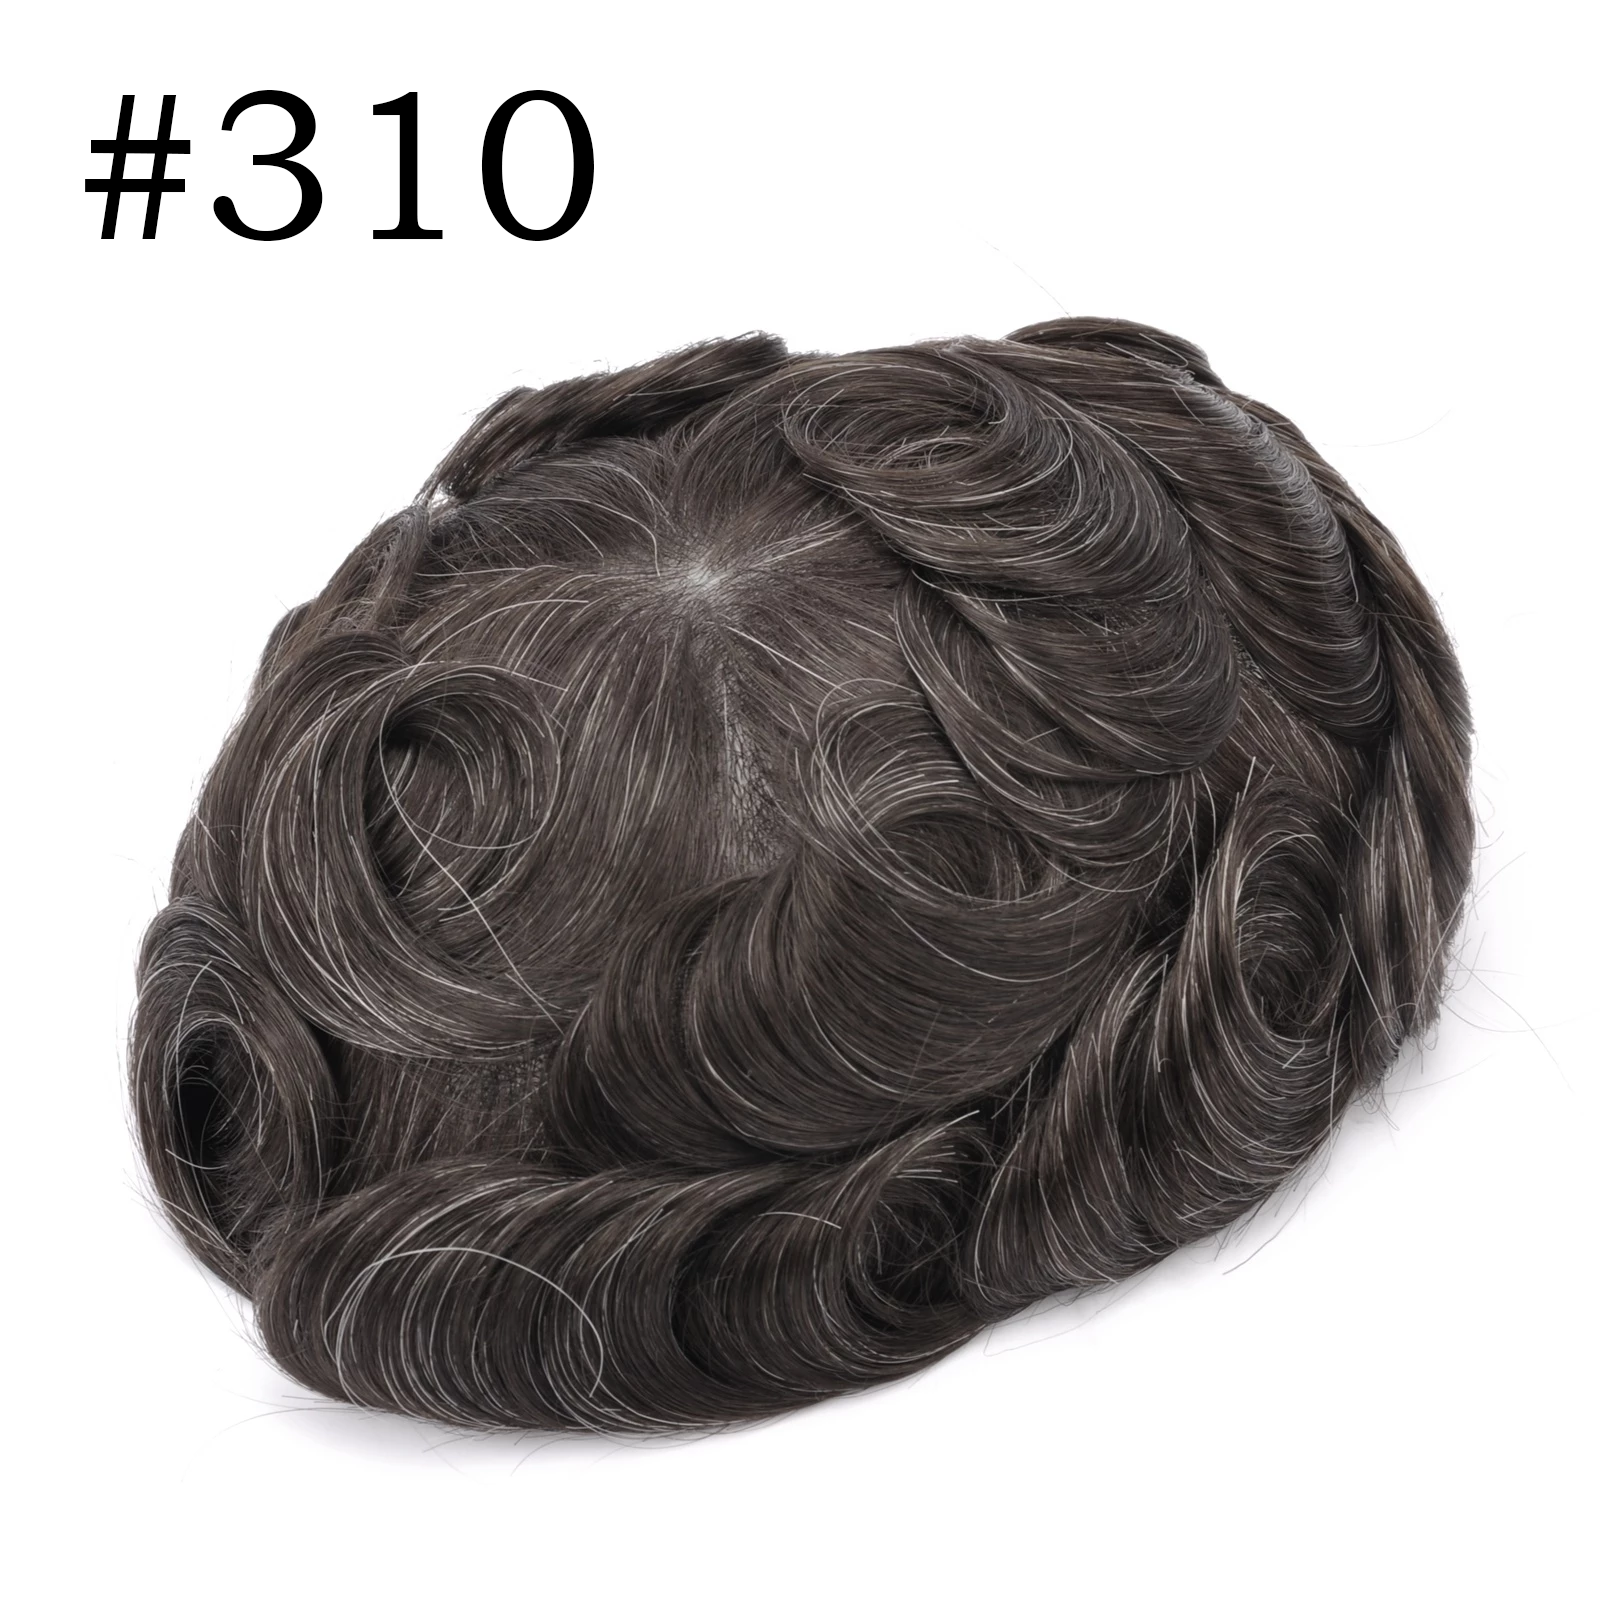 GEXWIGS Thin Skin Toupee Human Hair Replacement for Men V-Loop.